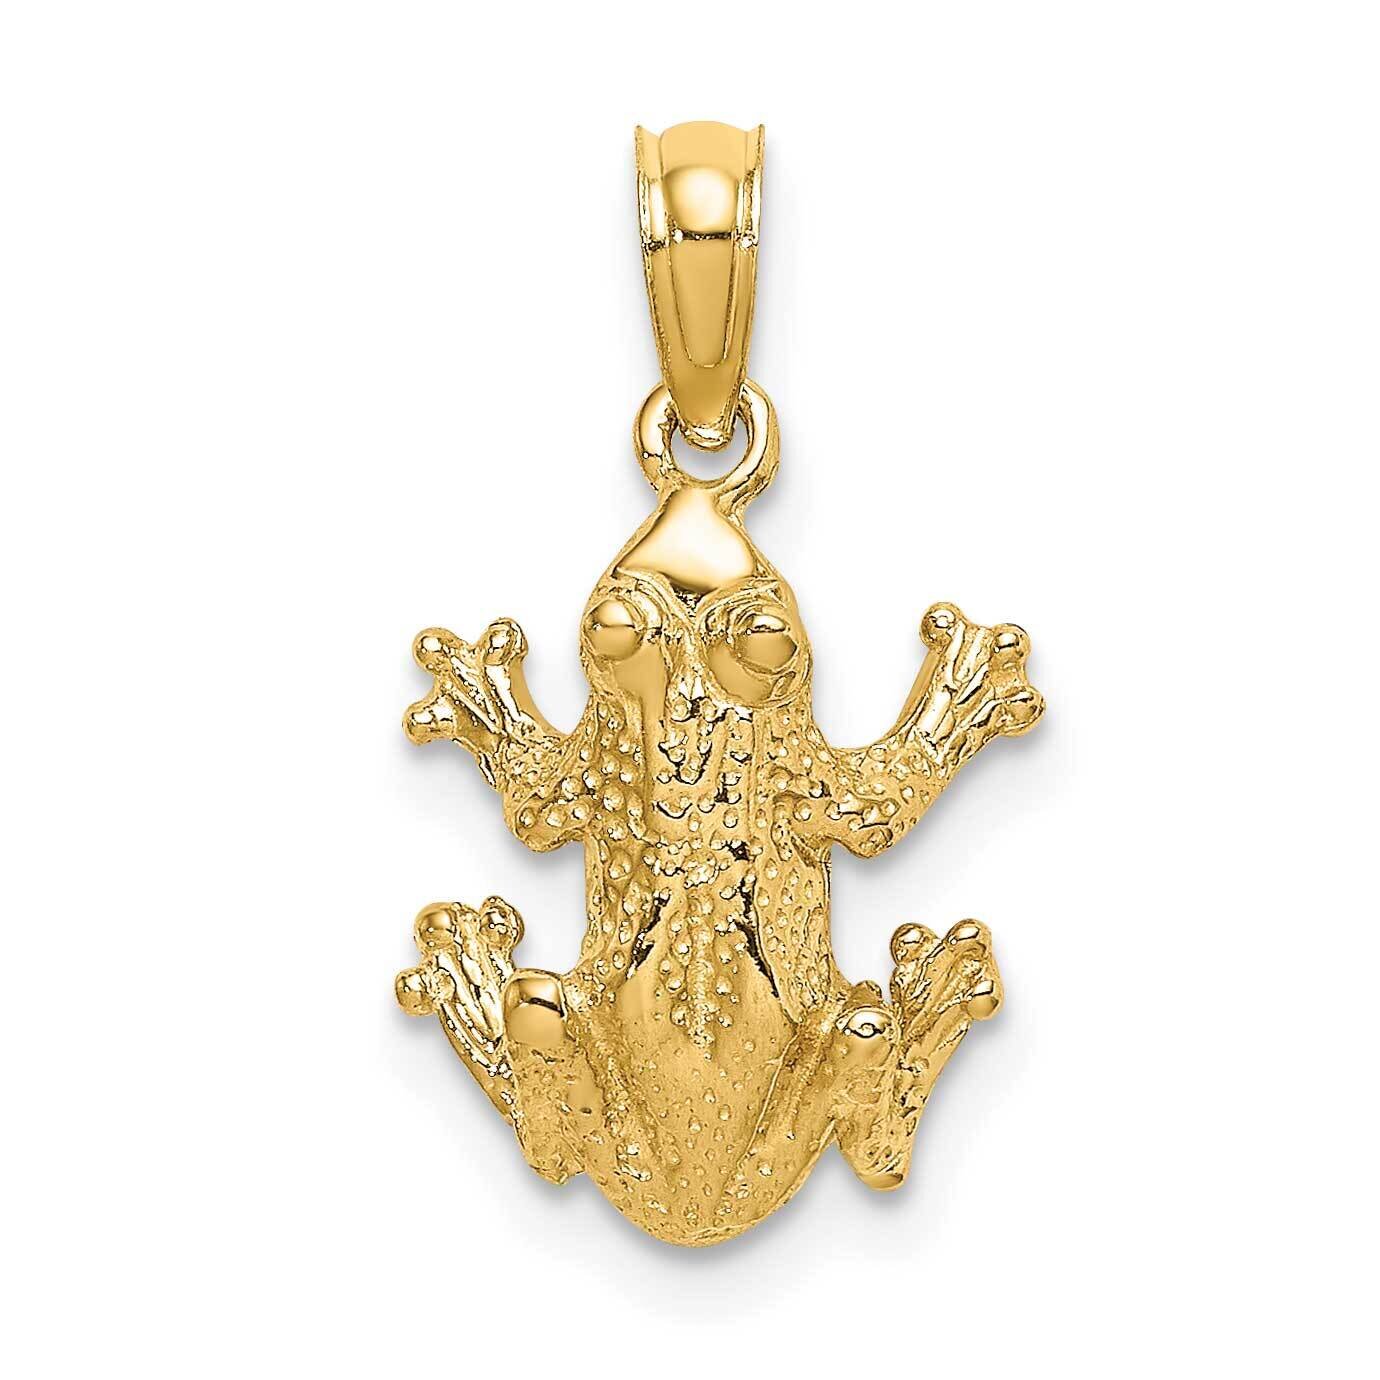 Textured Top View Frog Charm 14k Gold 2-D K6517